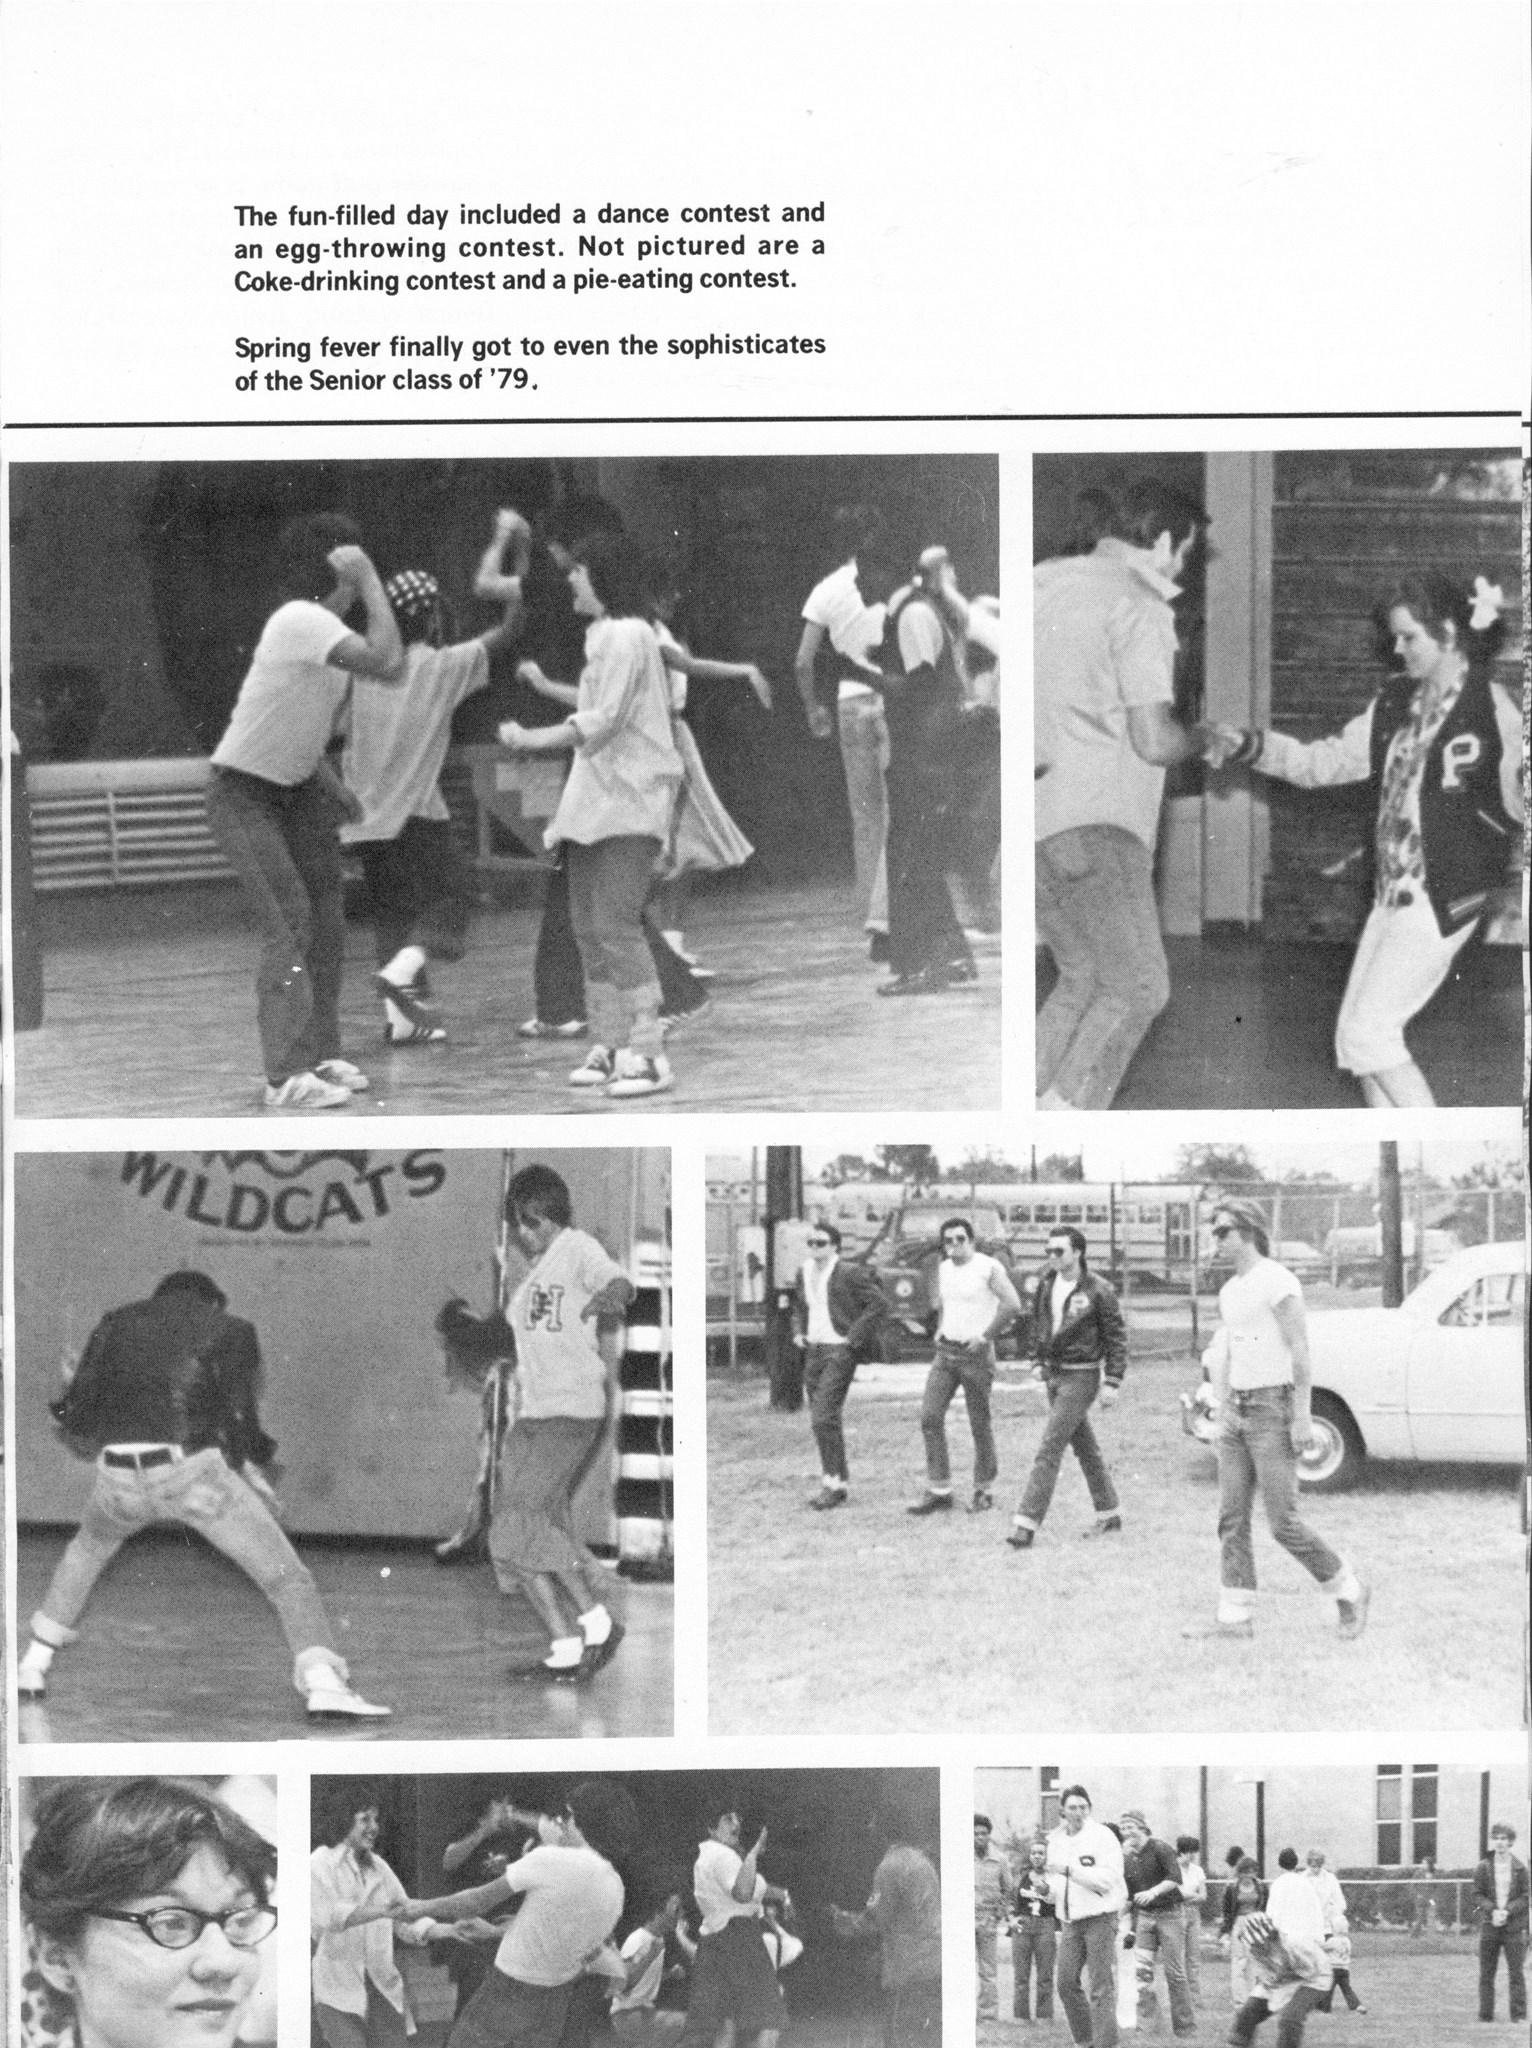 ../../../Images/Large/1979/Arclight-1979-pg0145.jpg